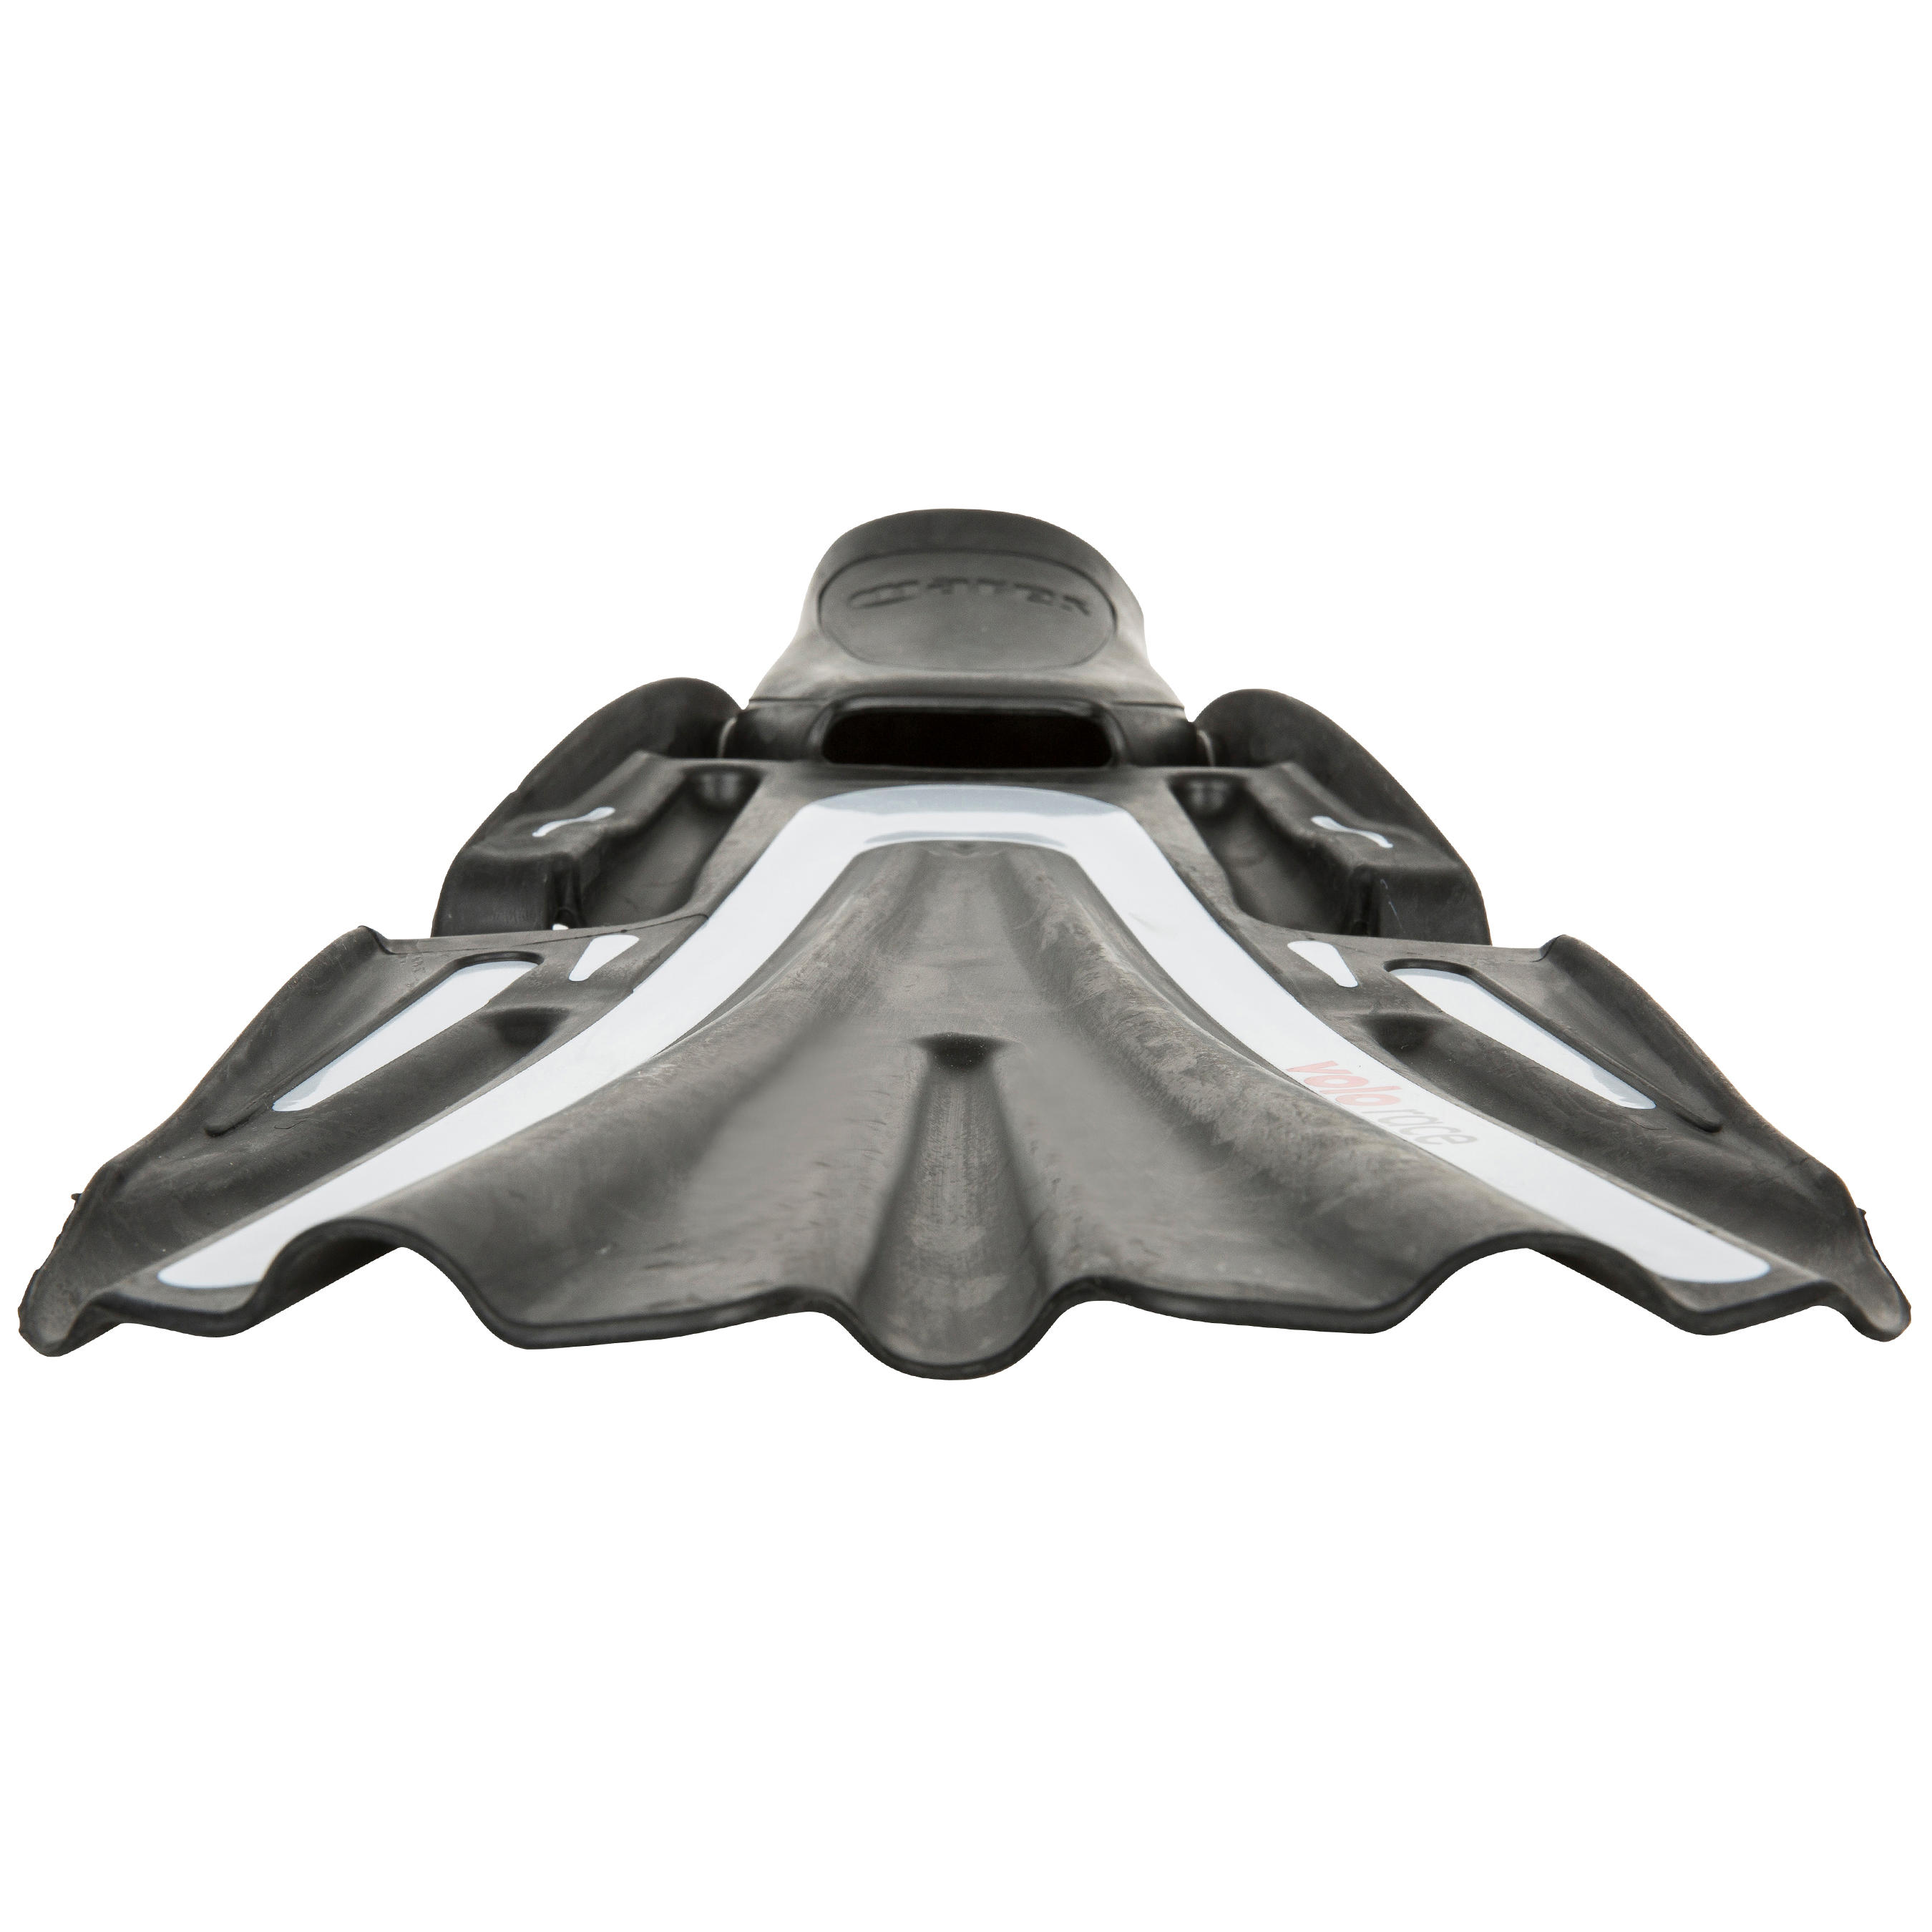 Volo Race diving fins black and light grey 6/10